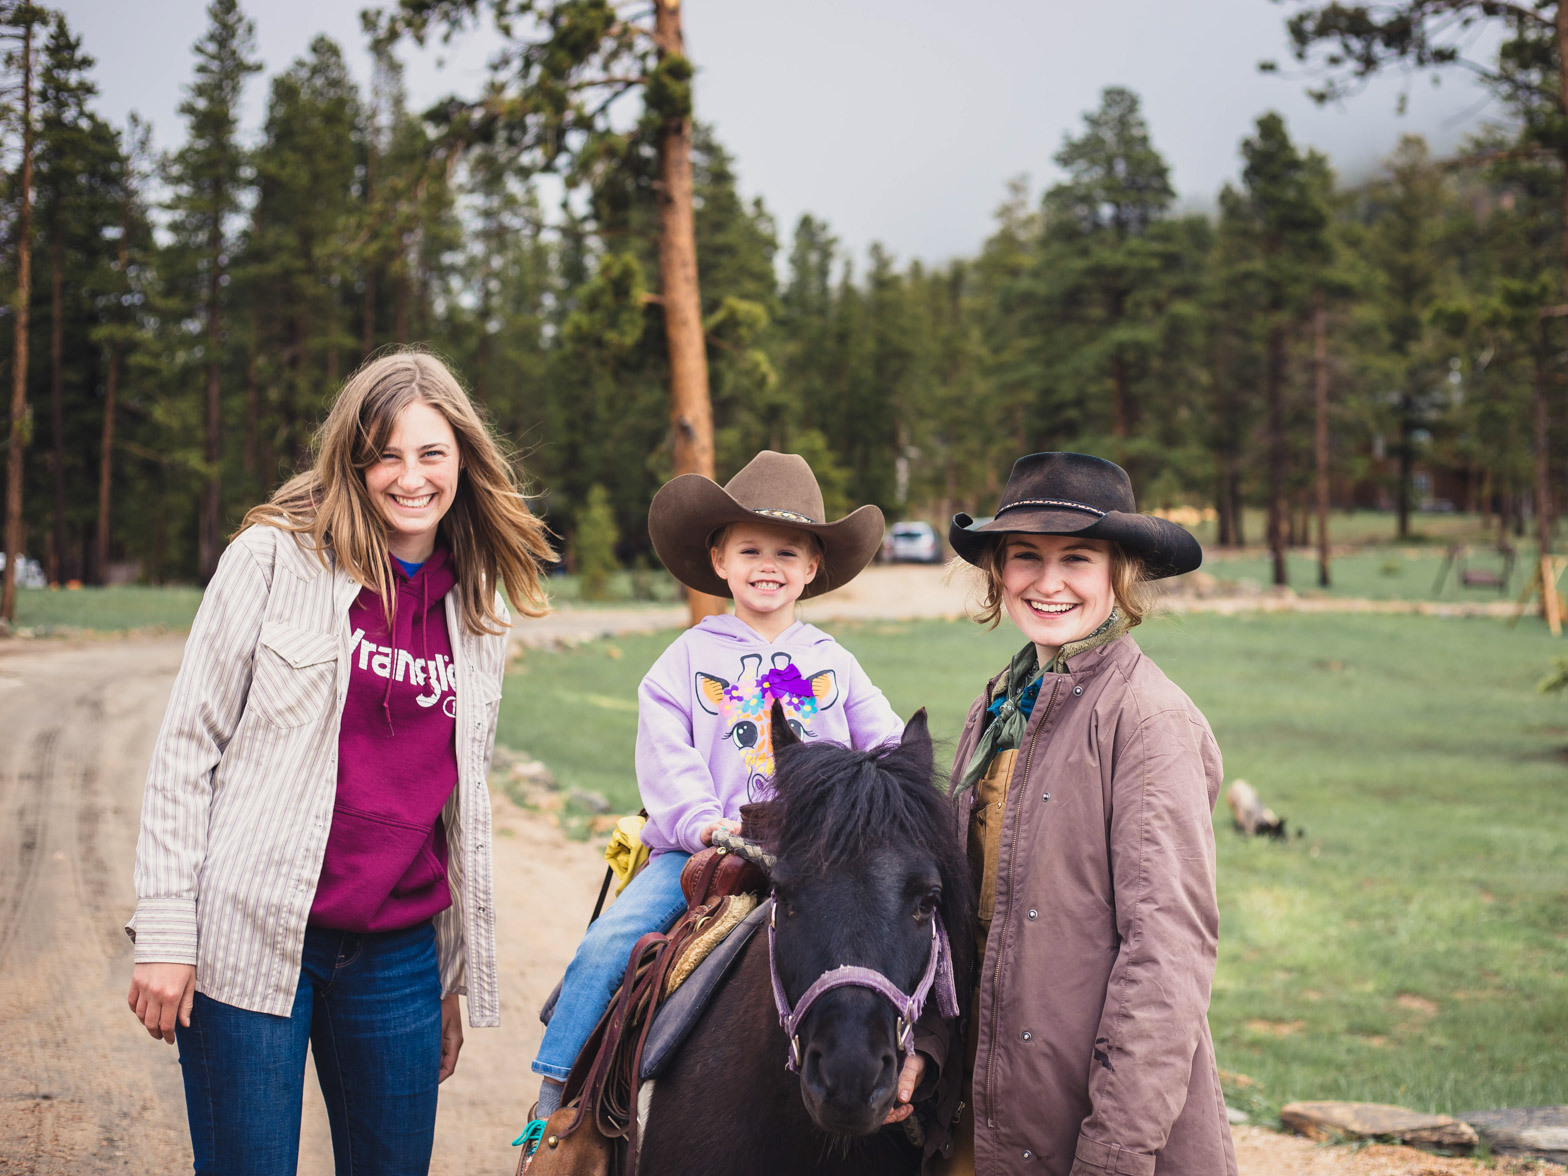 A little girl riding a horse with two young women helping her by her side.